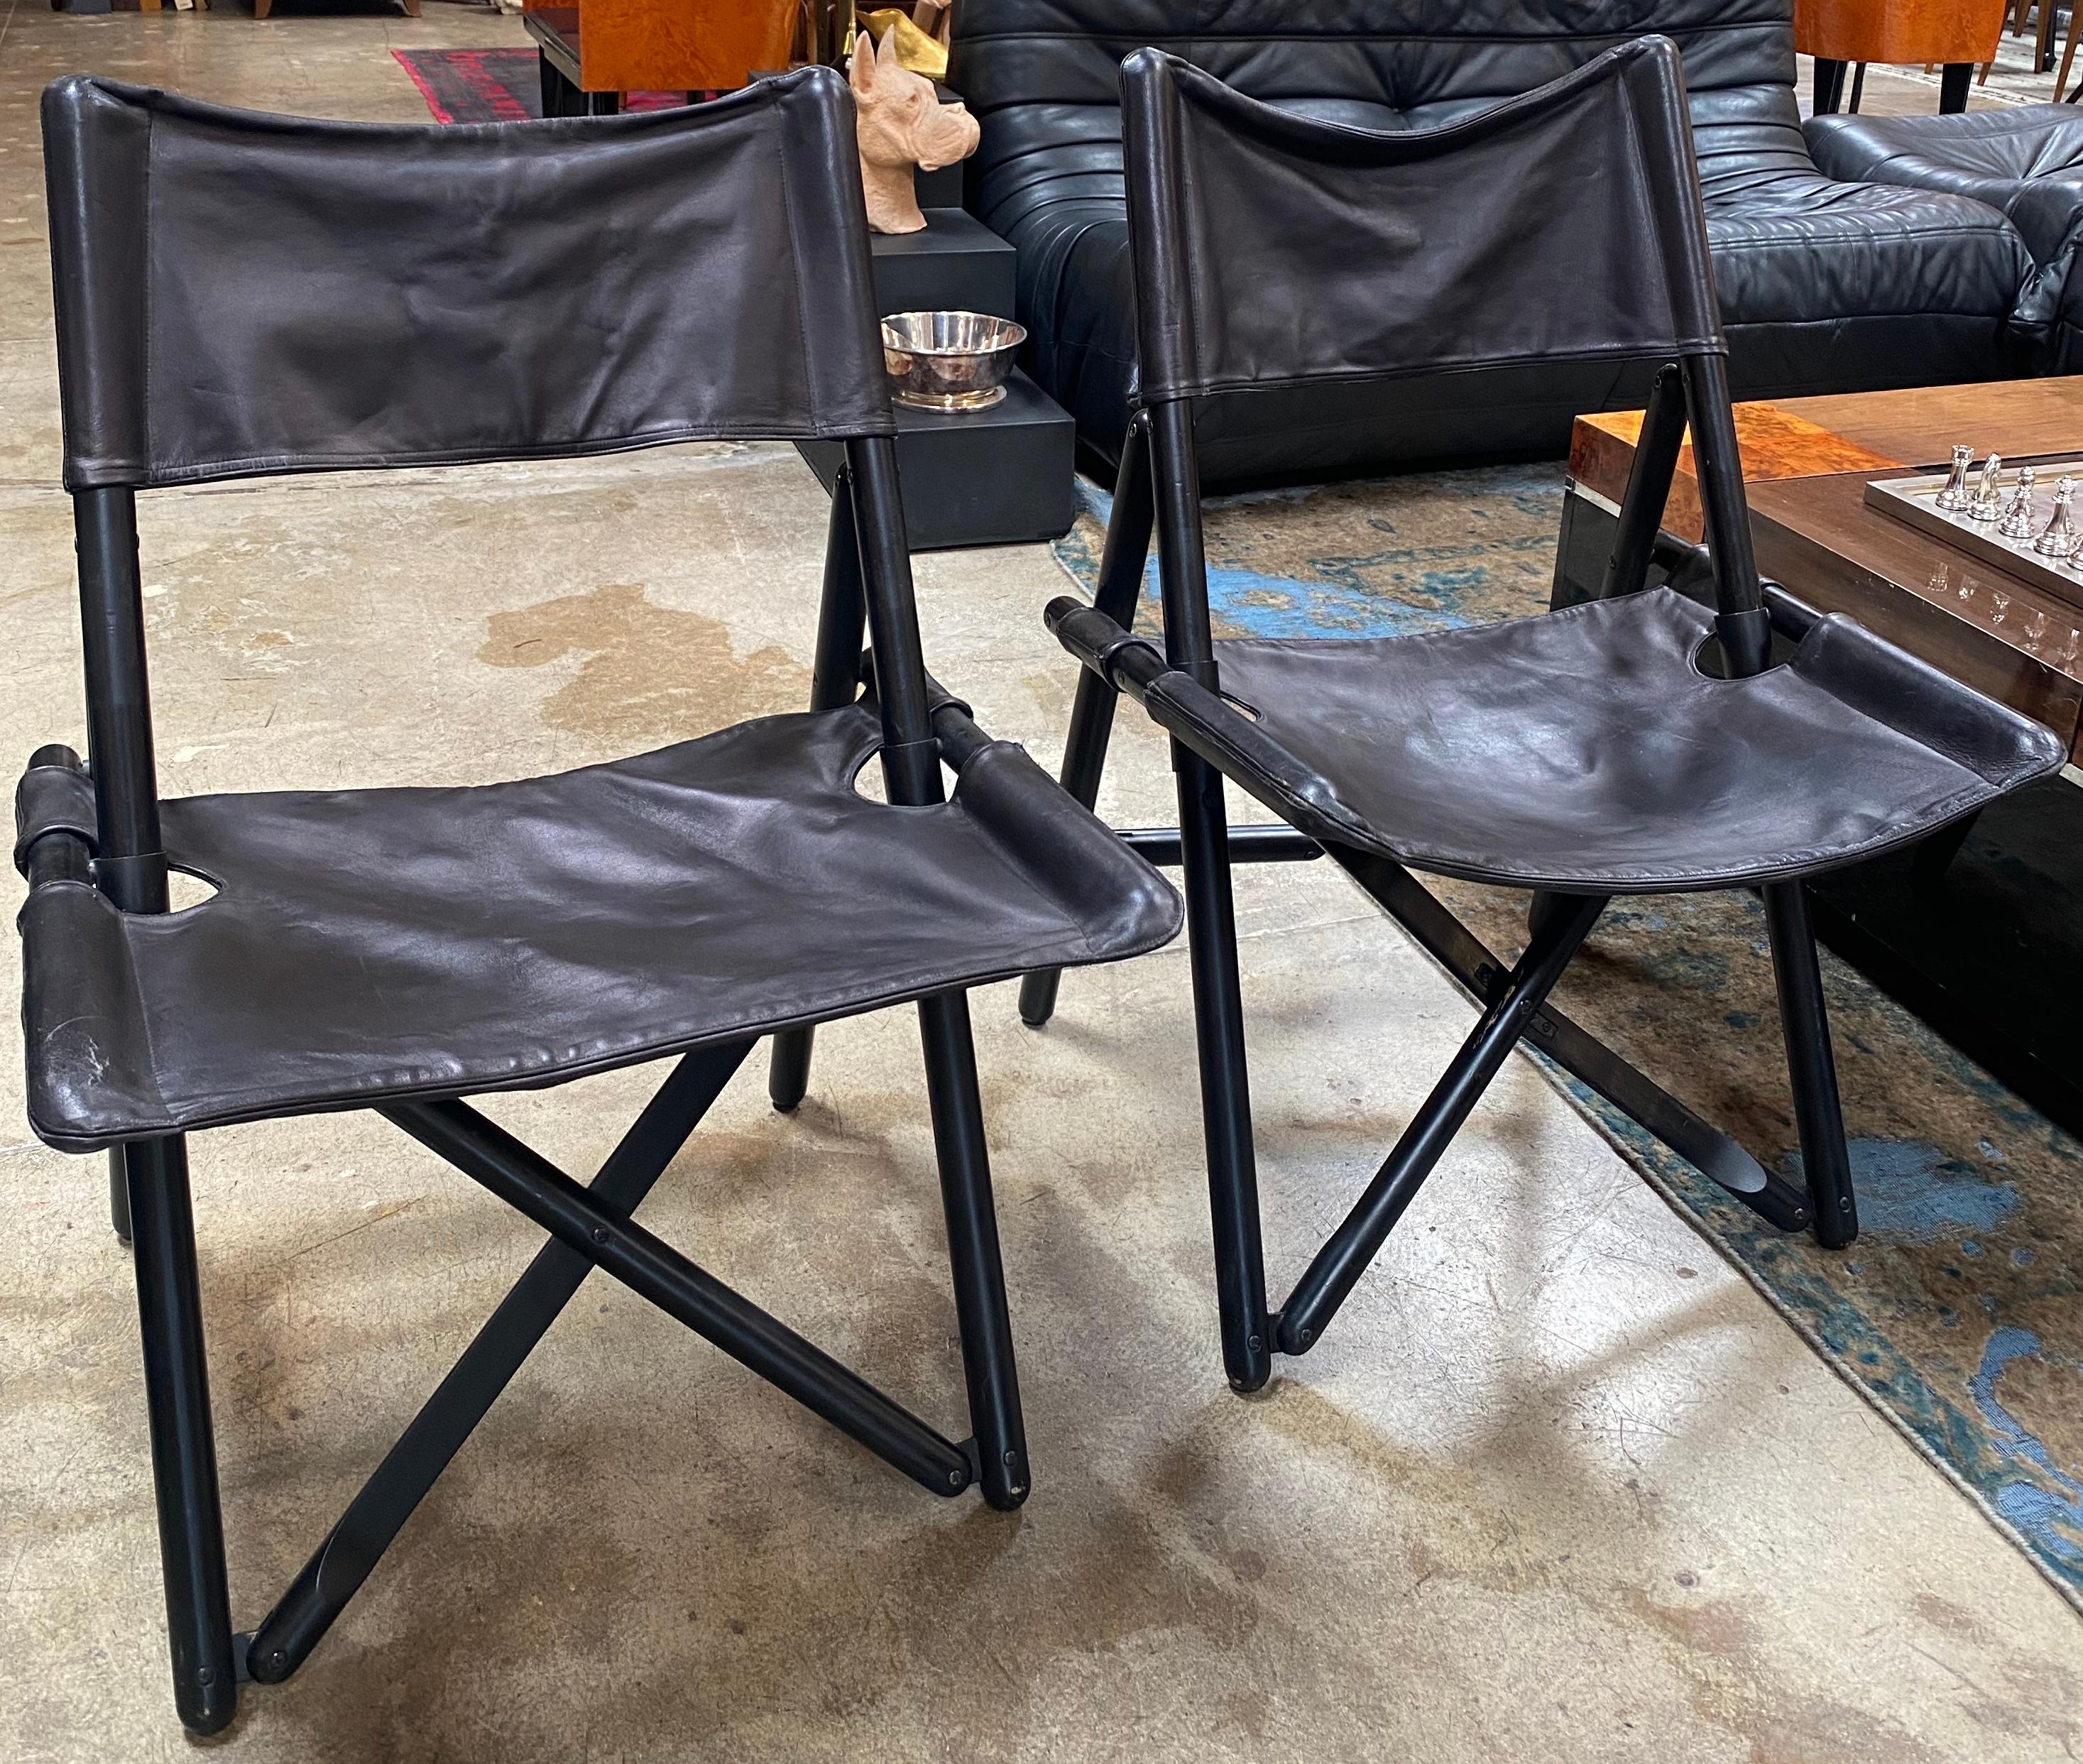 Beautiful pair of 2 Italian mid century side chairs made with wood and leather. The chairs were made in Italy 1960s circa
The conditions of the chairs are vintage and presents minor damage. These chairs, with their organic shapes, are an elegant